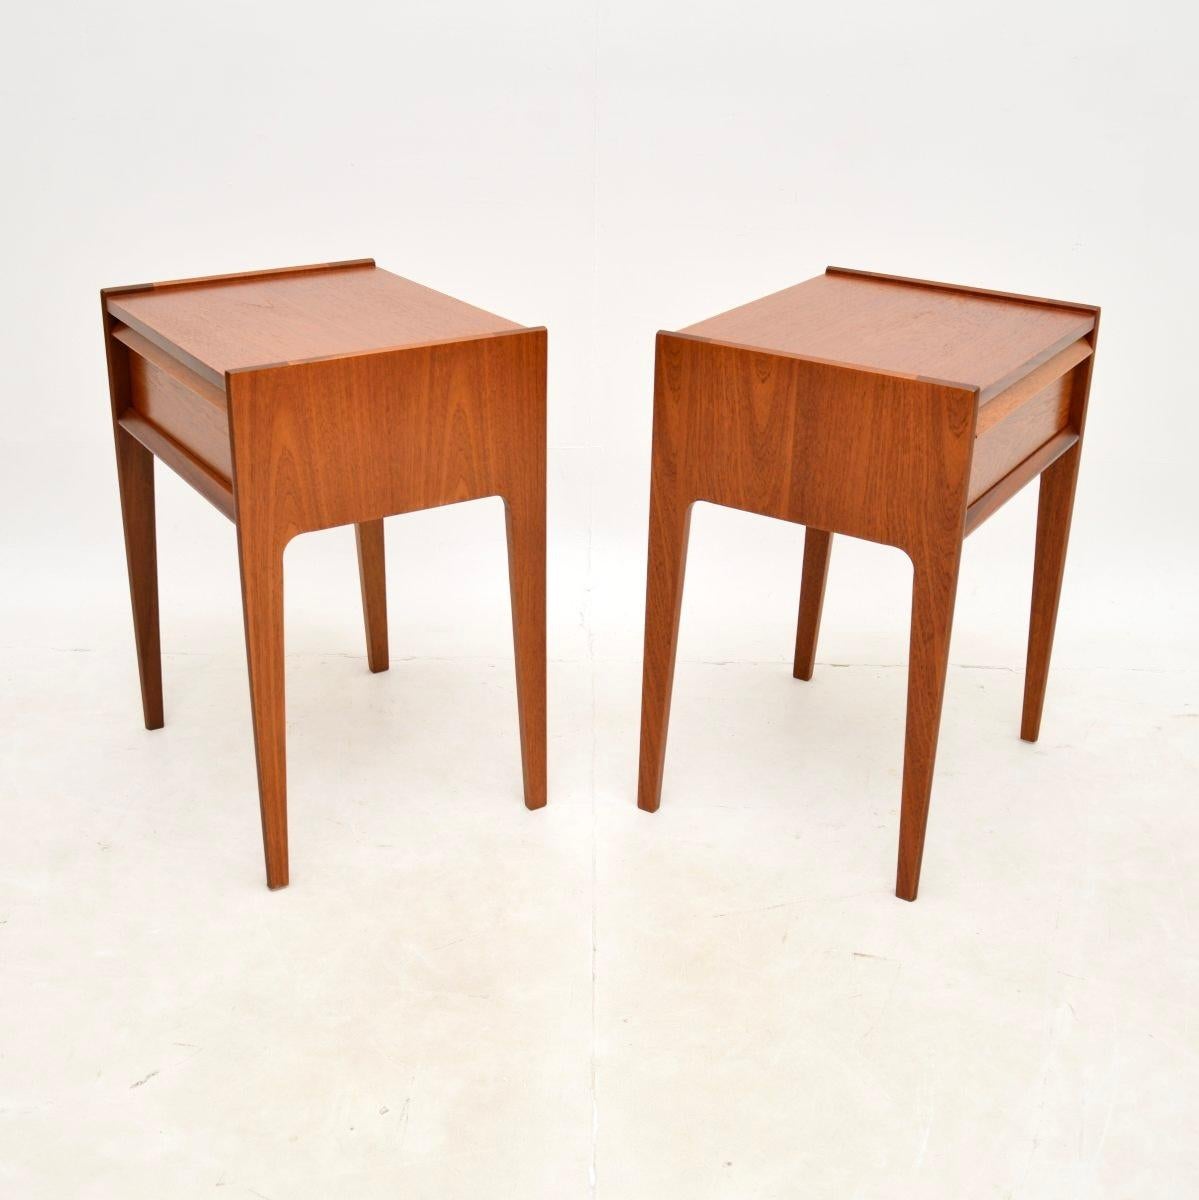 British Pair of Vintage Teak Bedside Tables by Younger For Sale